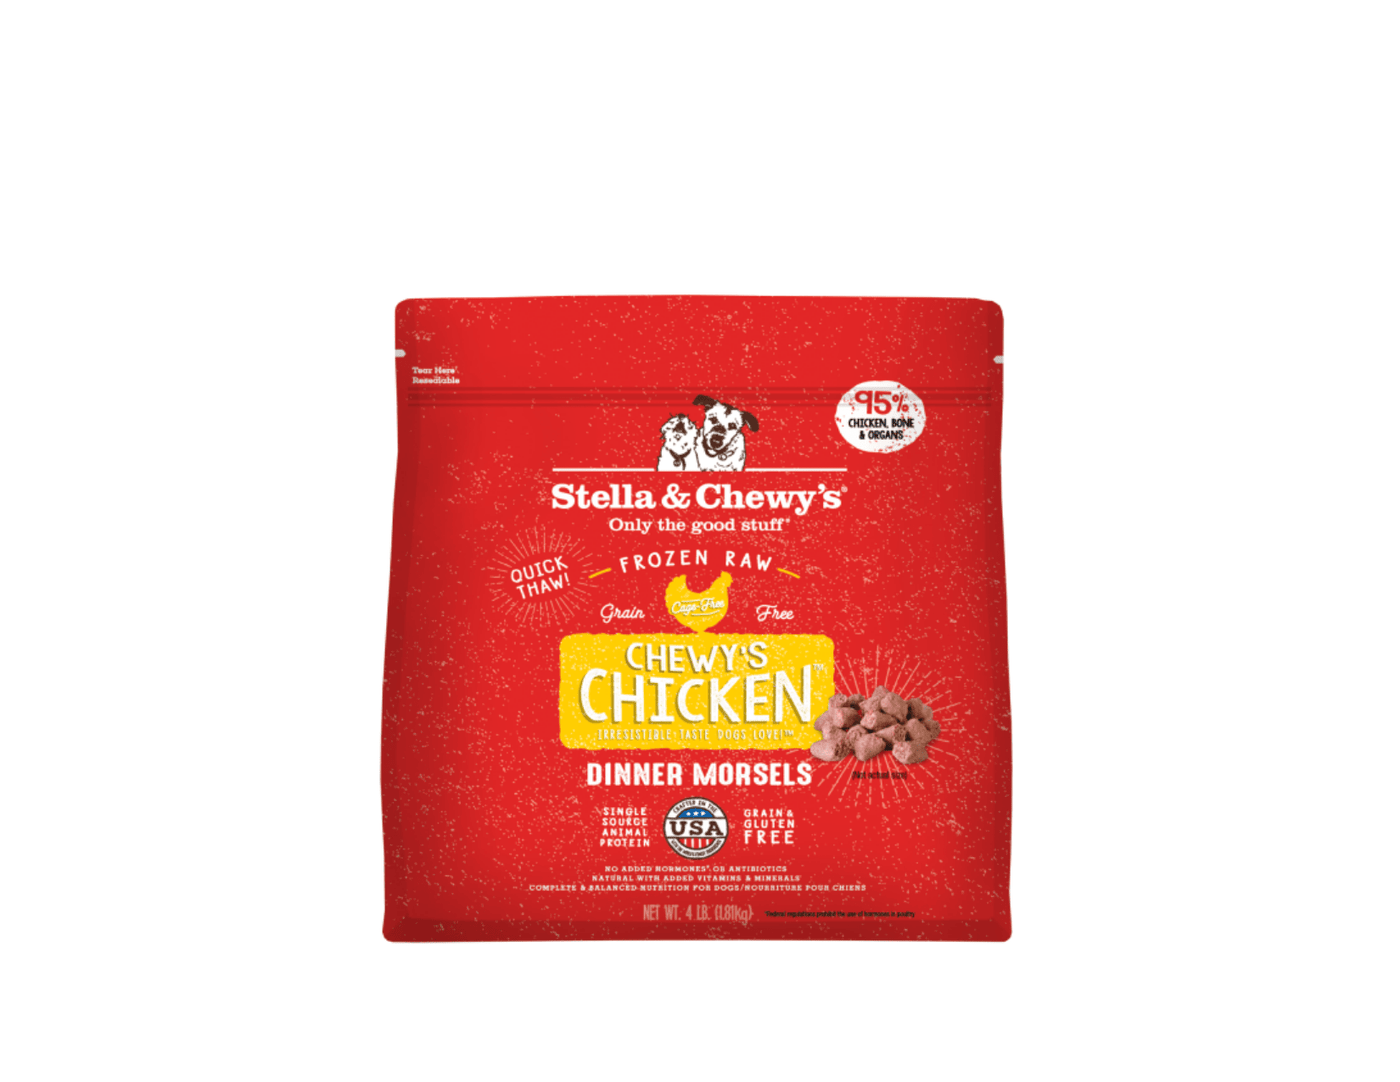 Chewy's Chicken Dinner Morsels 4LB - Frozen Raw Dog Food - Stella & Chewy's - PetToba-Stella & Chewys